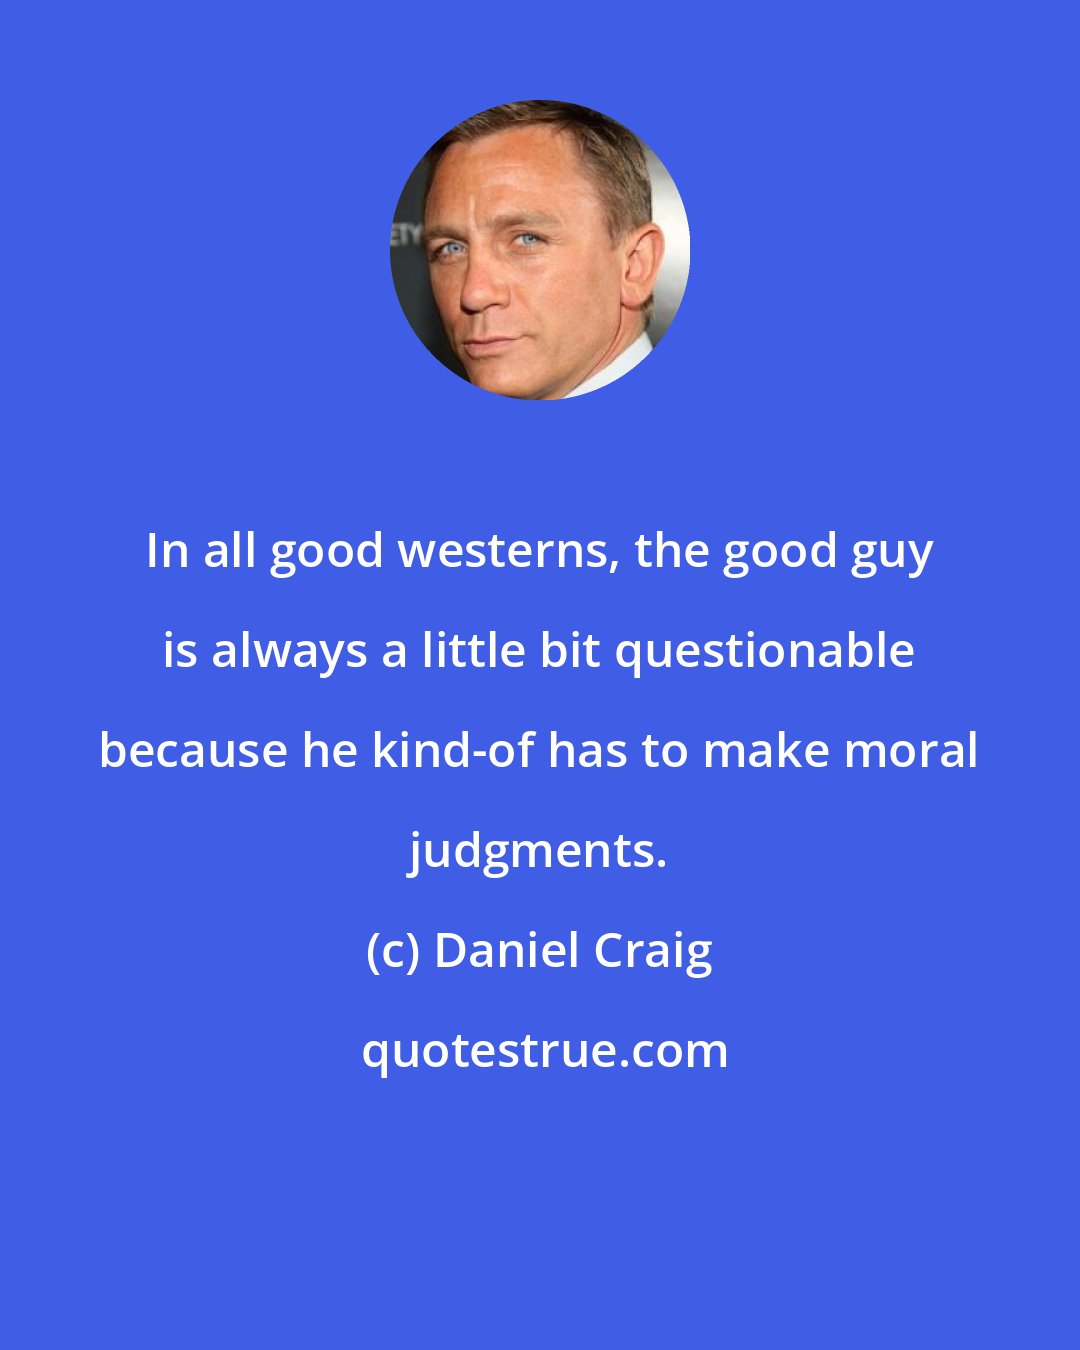 Daniel Craig: In all good westerns, the good guy is always a little bit questionable because he kind-of has to make moral judgments.